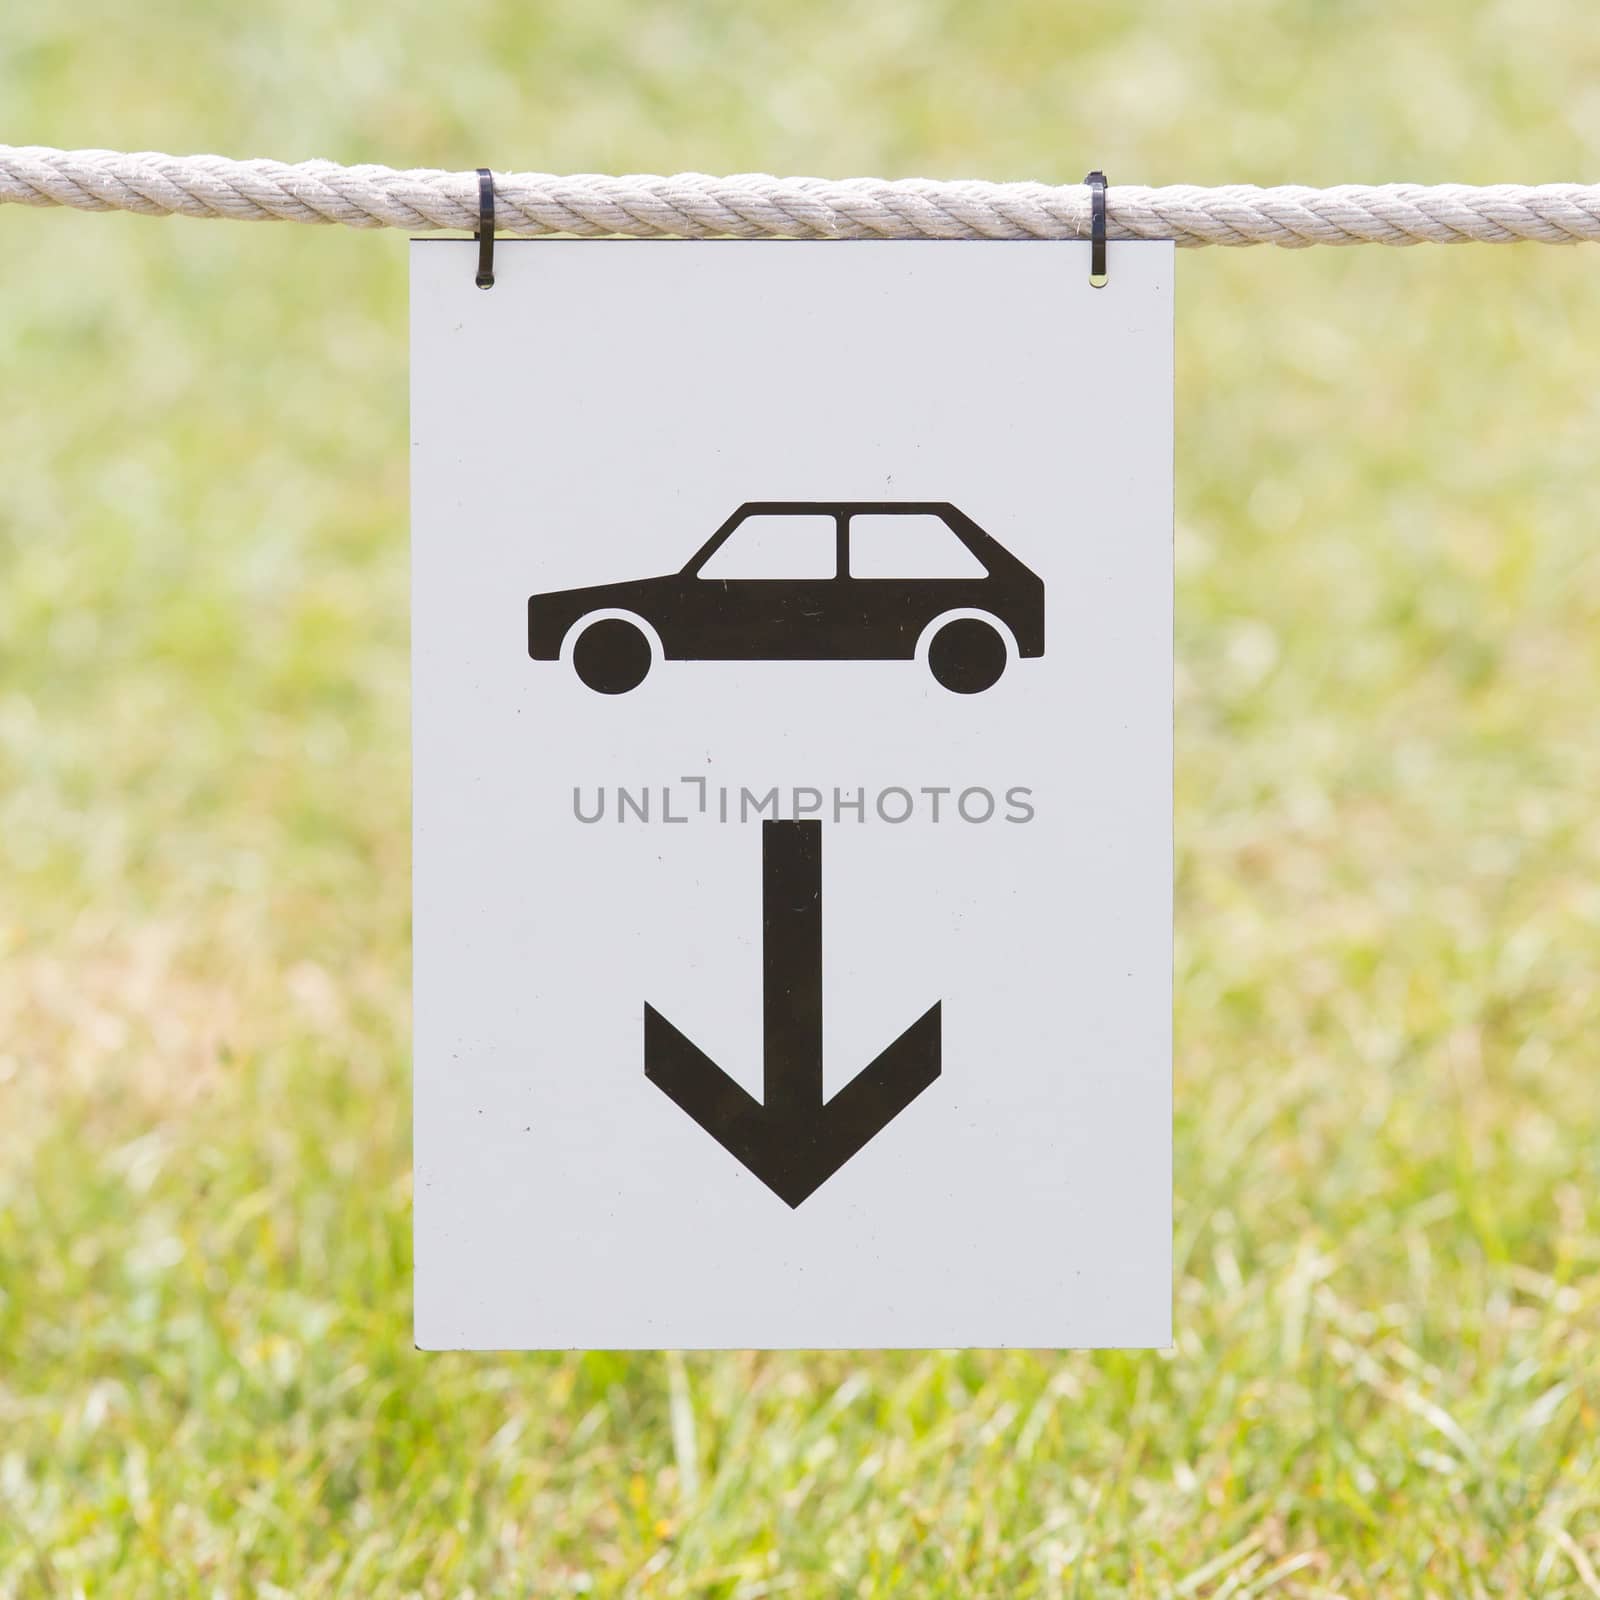 Car parking sign hanging on a rope